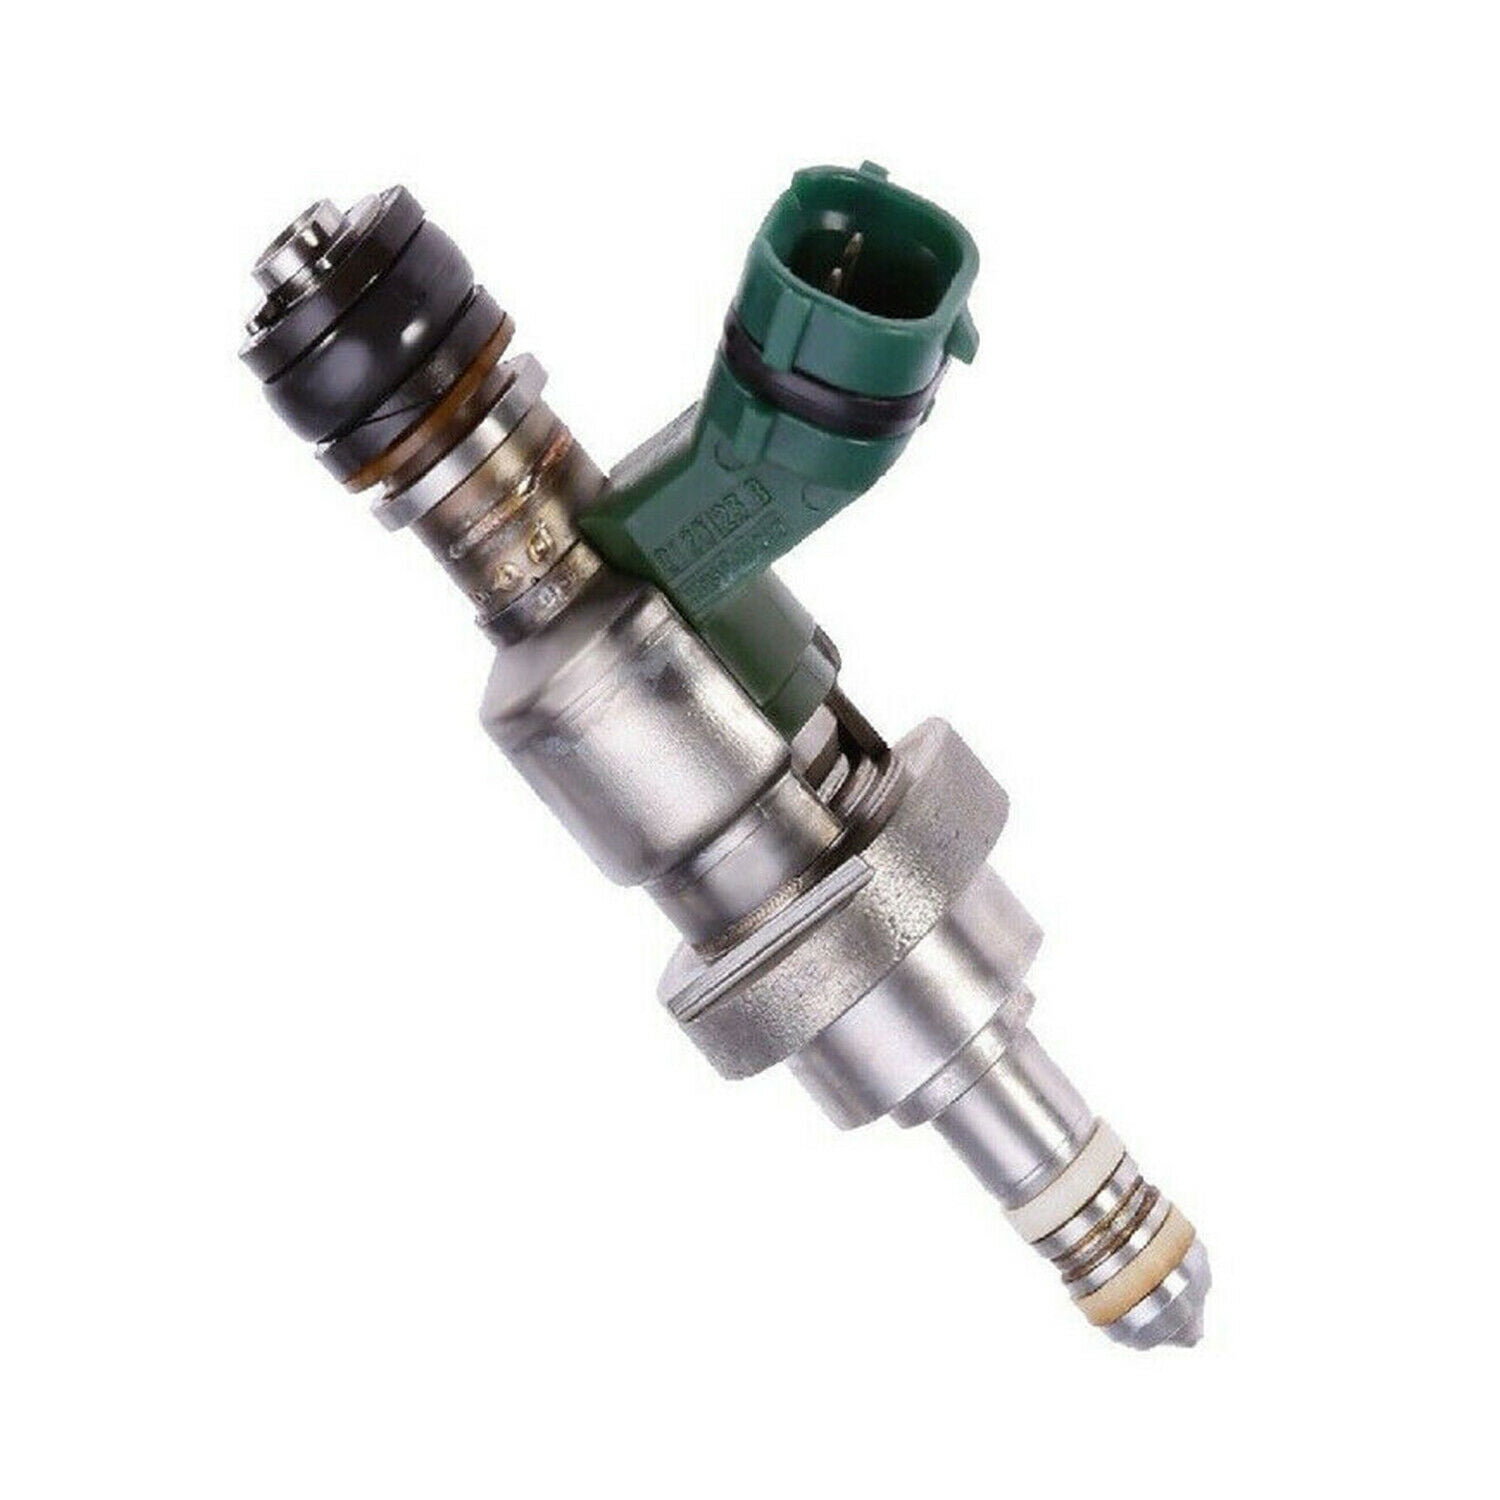 Brand New Single OEM DENSO Fuel Injector for 2006-13 Lexus IS250/GS300 2.5/3.0L